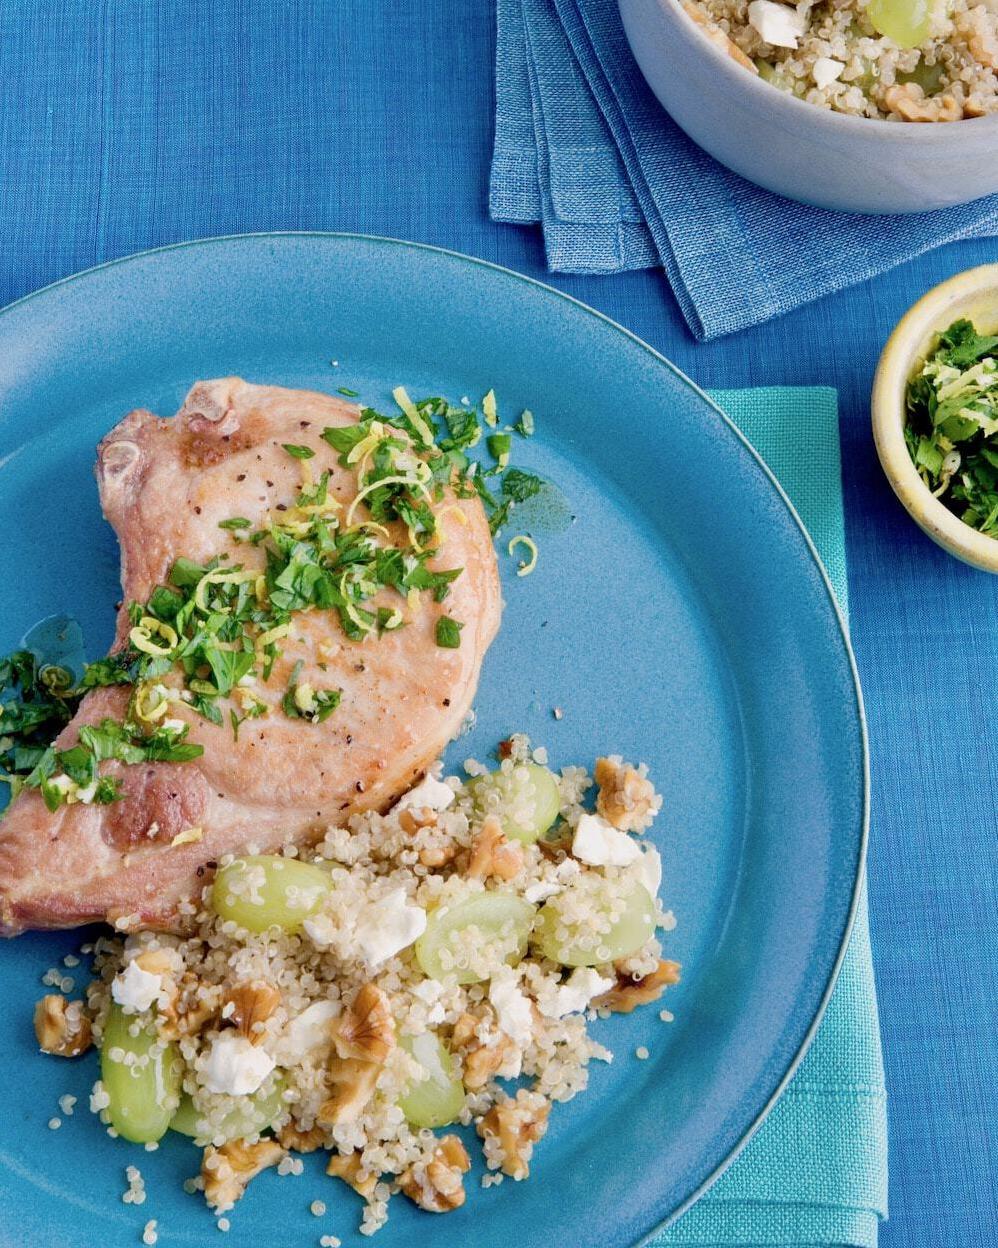  These pork chops look as good as they taste!